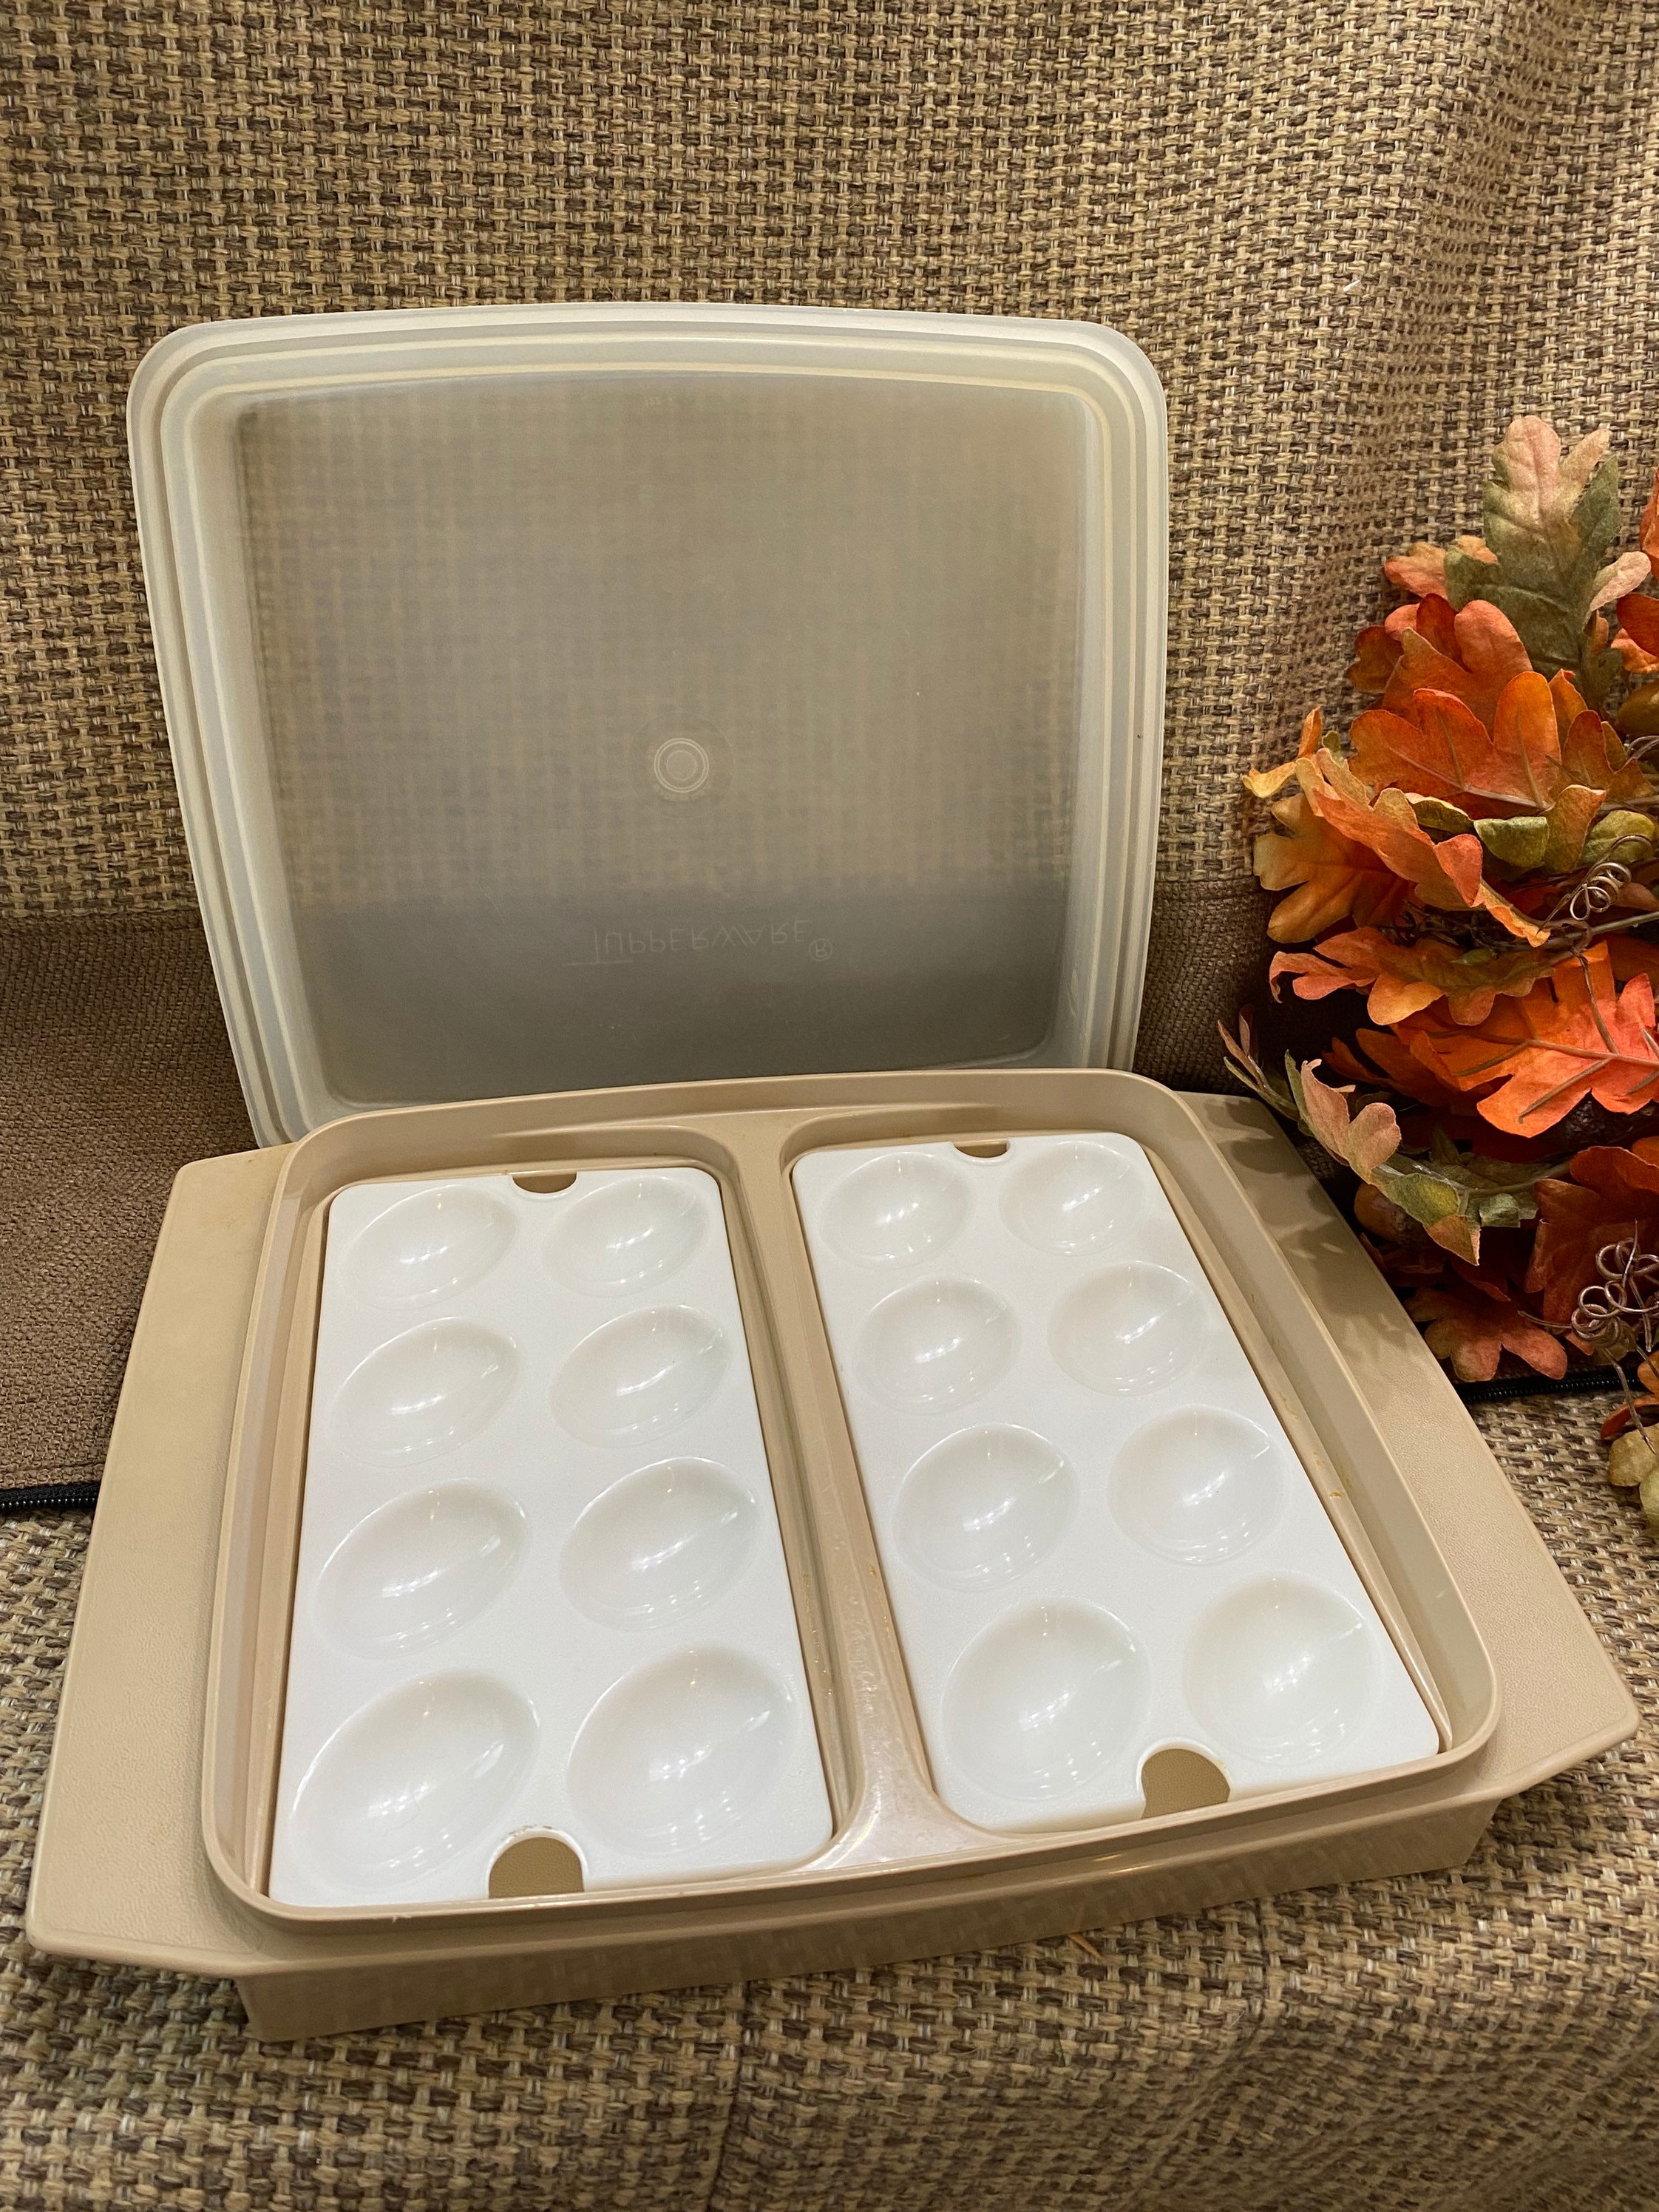 Vintage Tupperware Deviled Egg Tray 723, Tupperware Egg Storage Container,  Easter Egg Storage Display Tray 